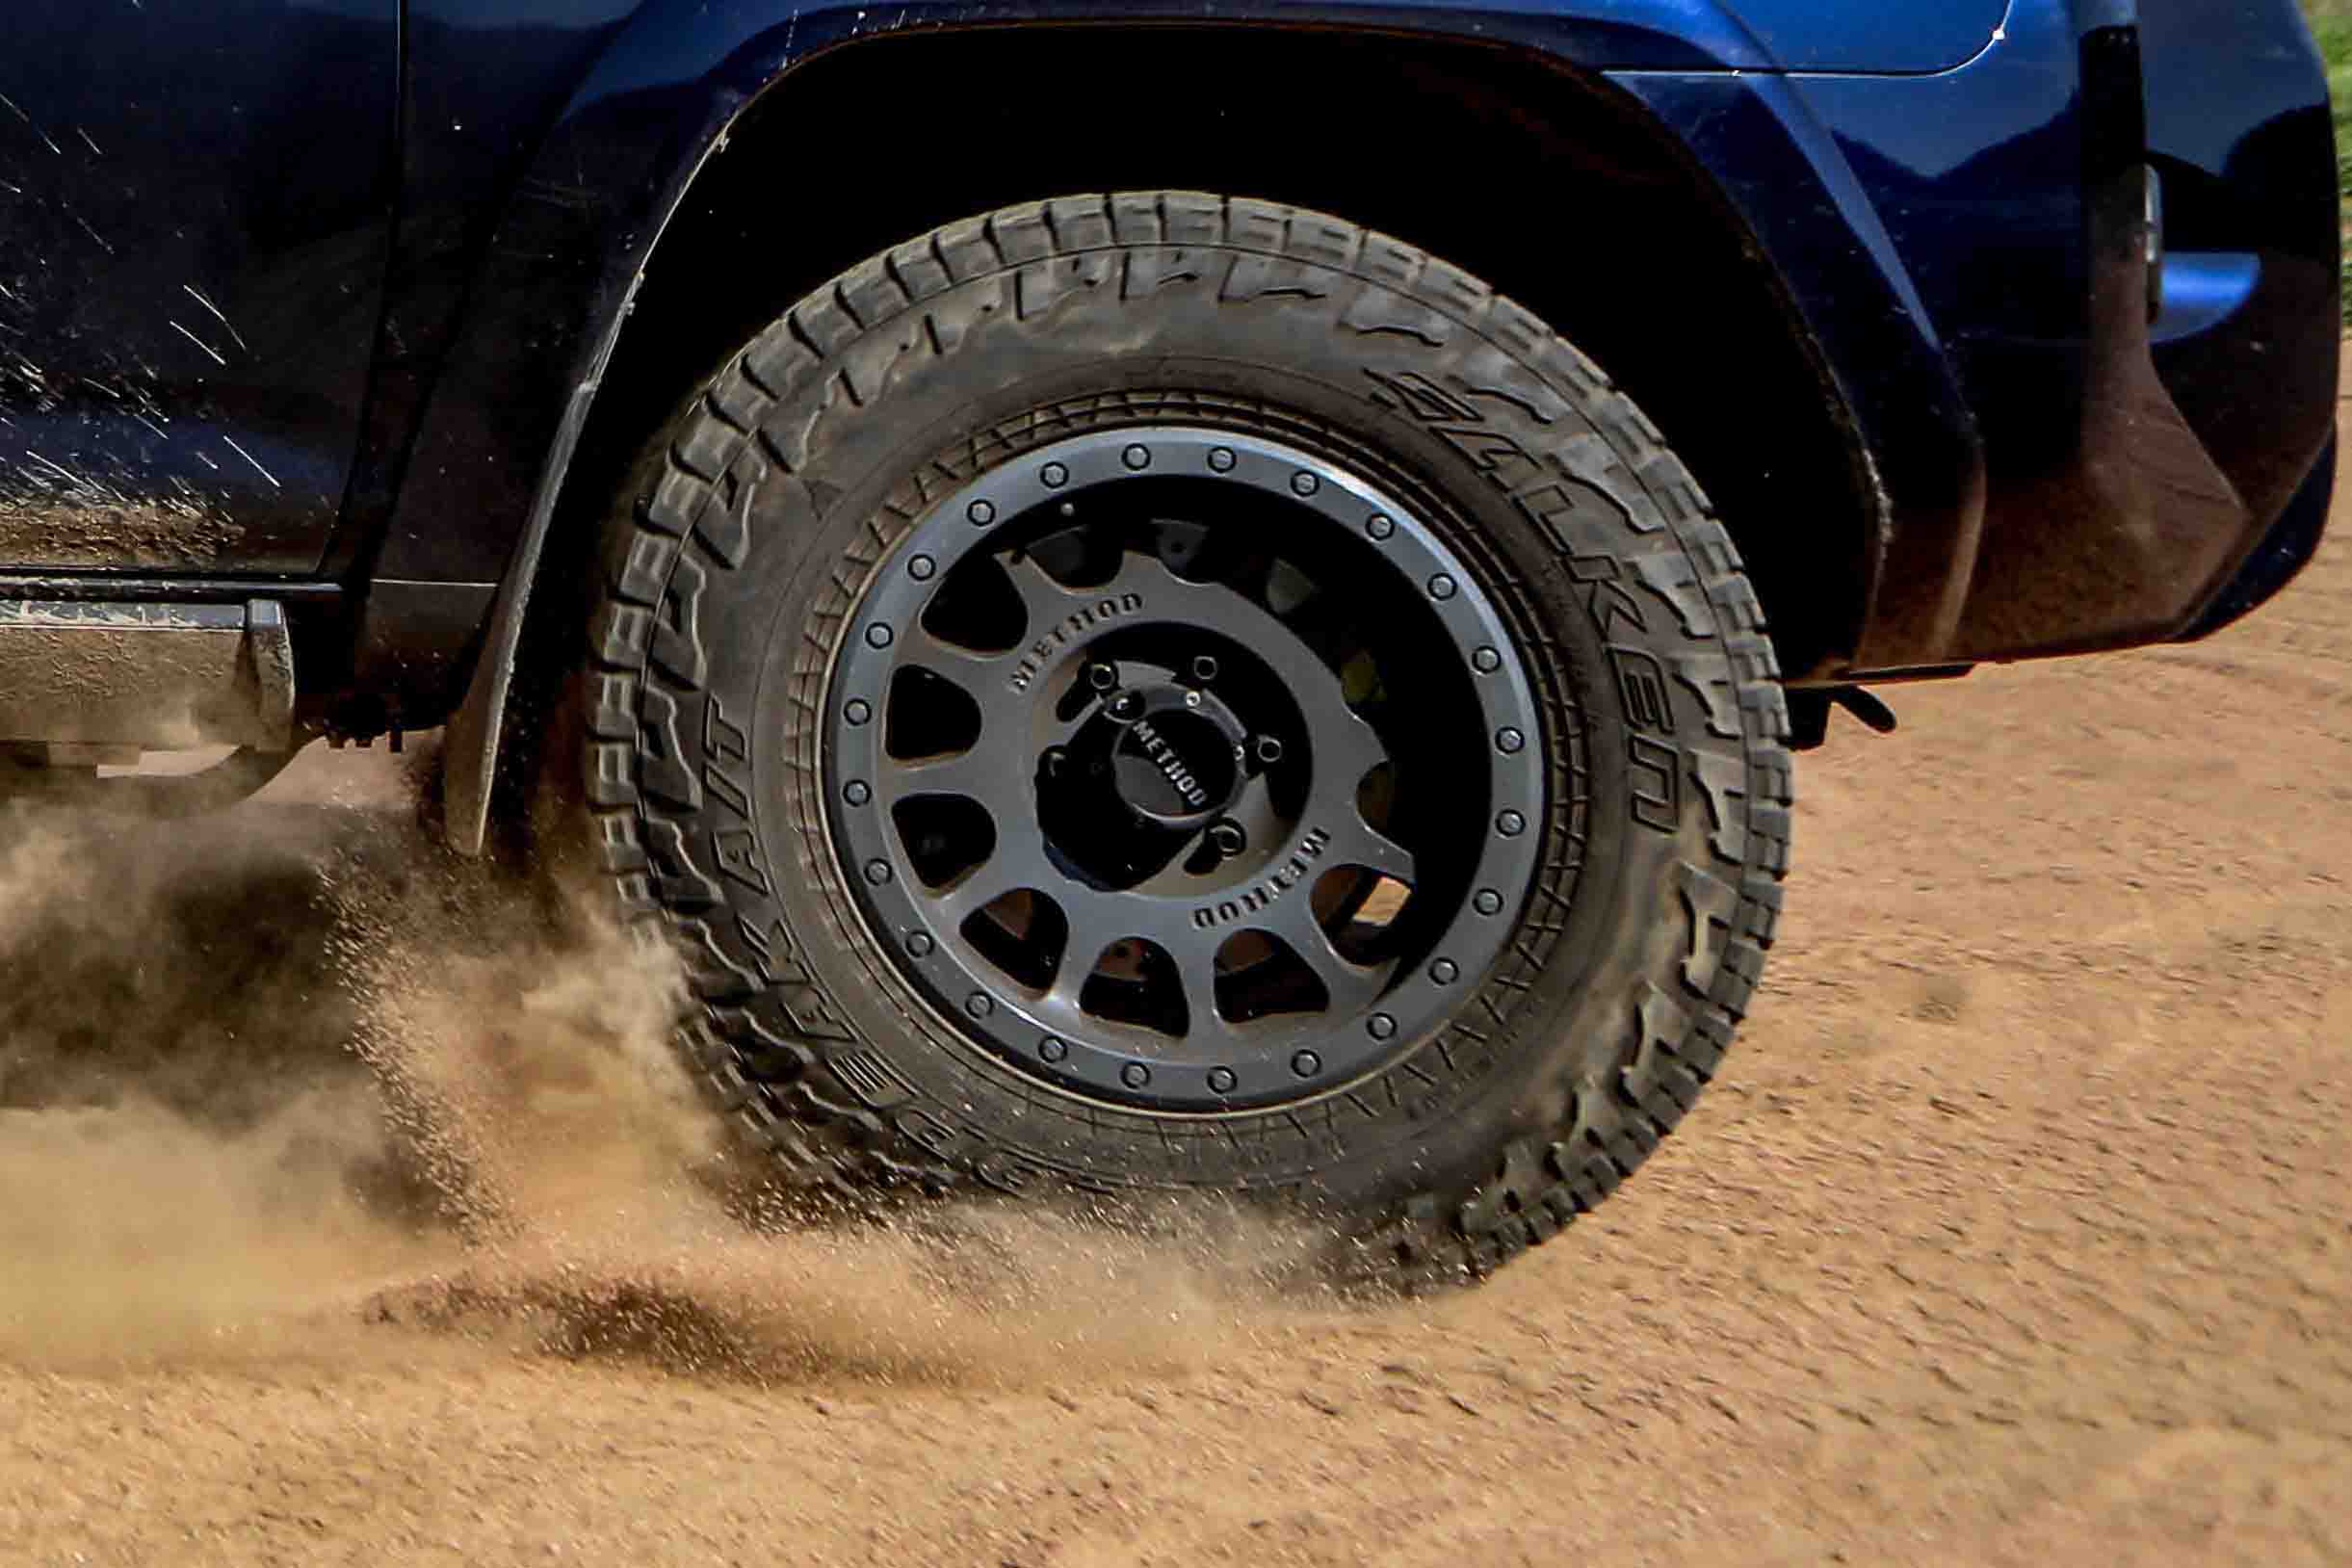 R1 Concepts Equipped Toyota 4Runner Wheel.